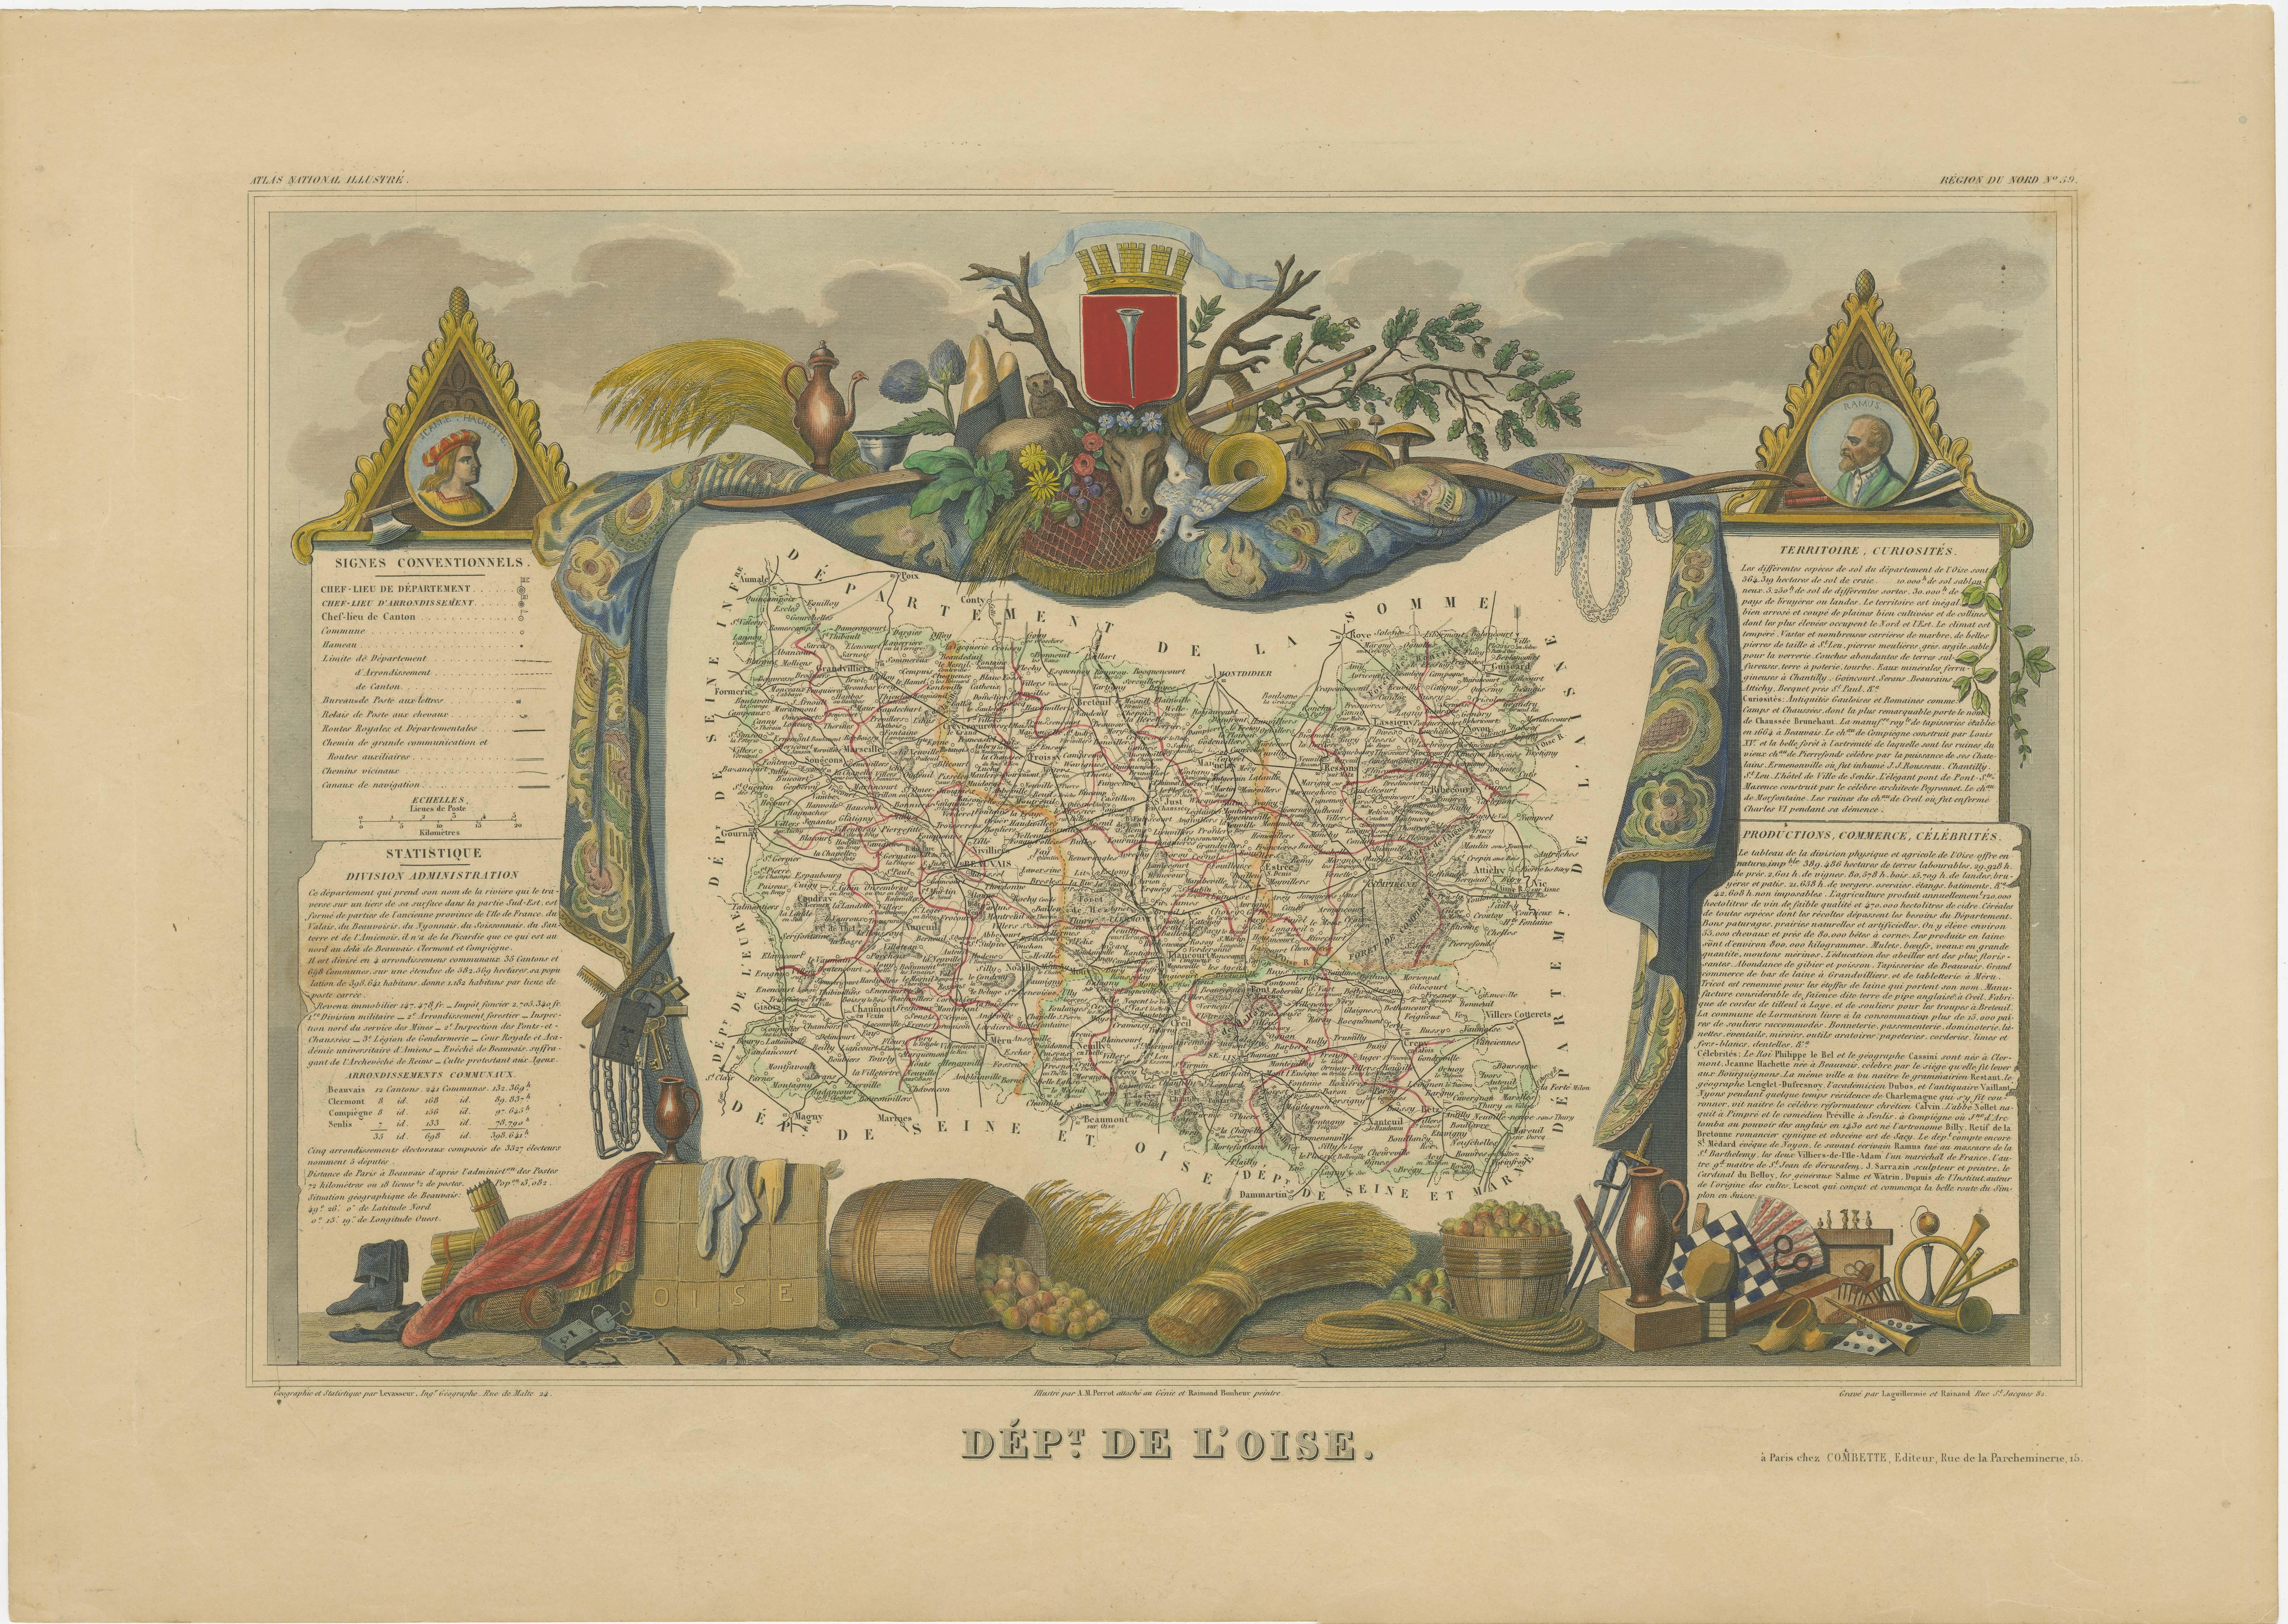 Antique map titled 'Dept. de l'Oise'. Old map of the French department of Oise, France. The map proper is surrounded by elaborate decorative engravings designed to illustrate both the natural beauty and trade richness of the land. There is a short